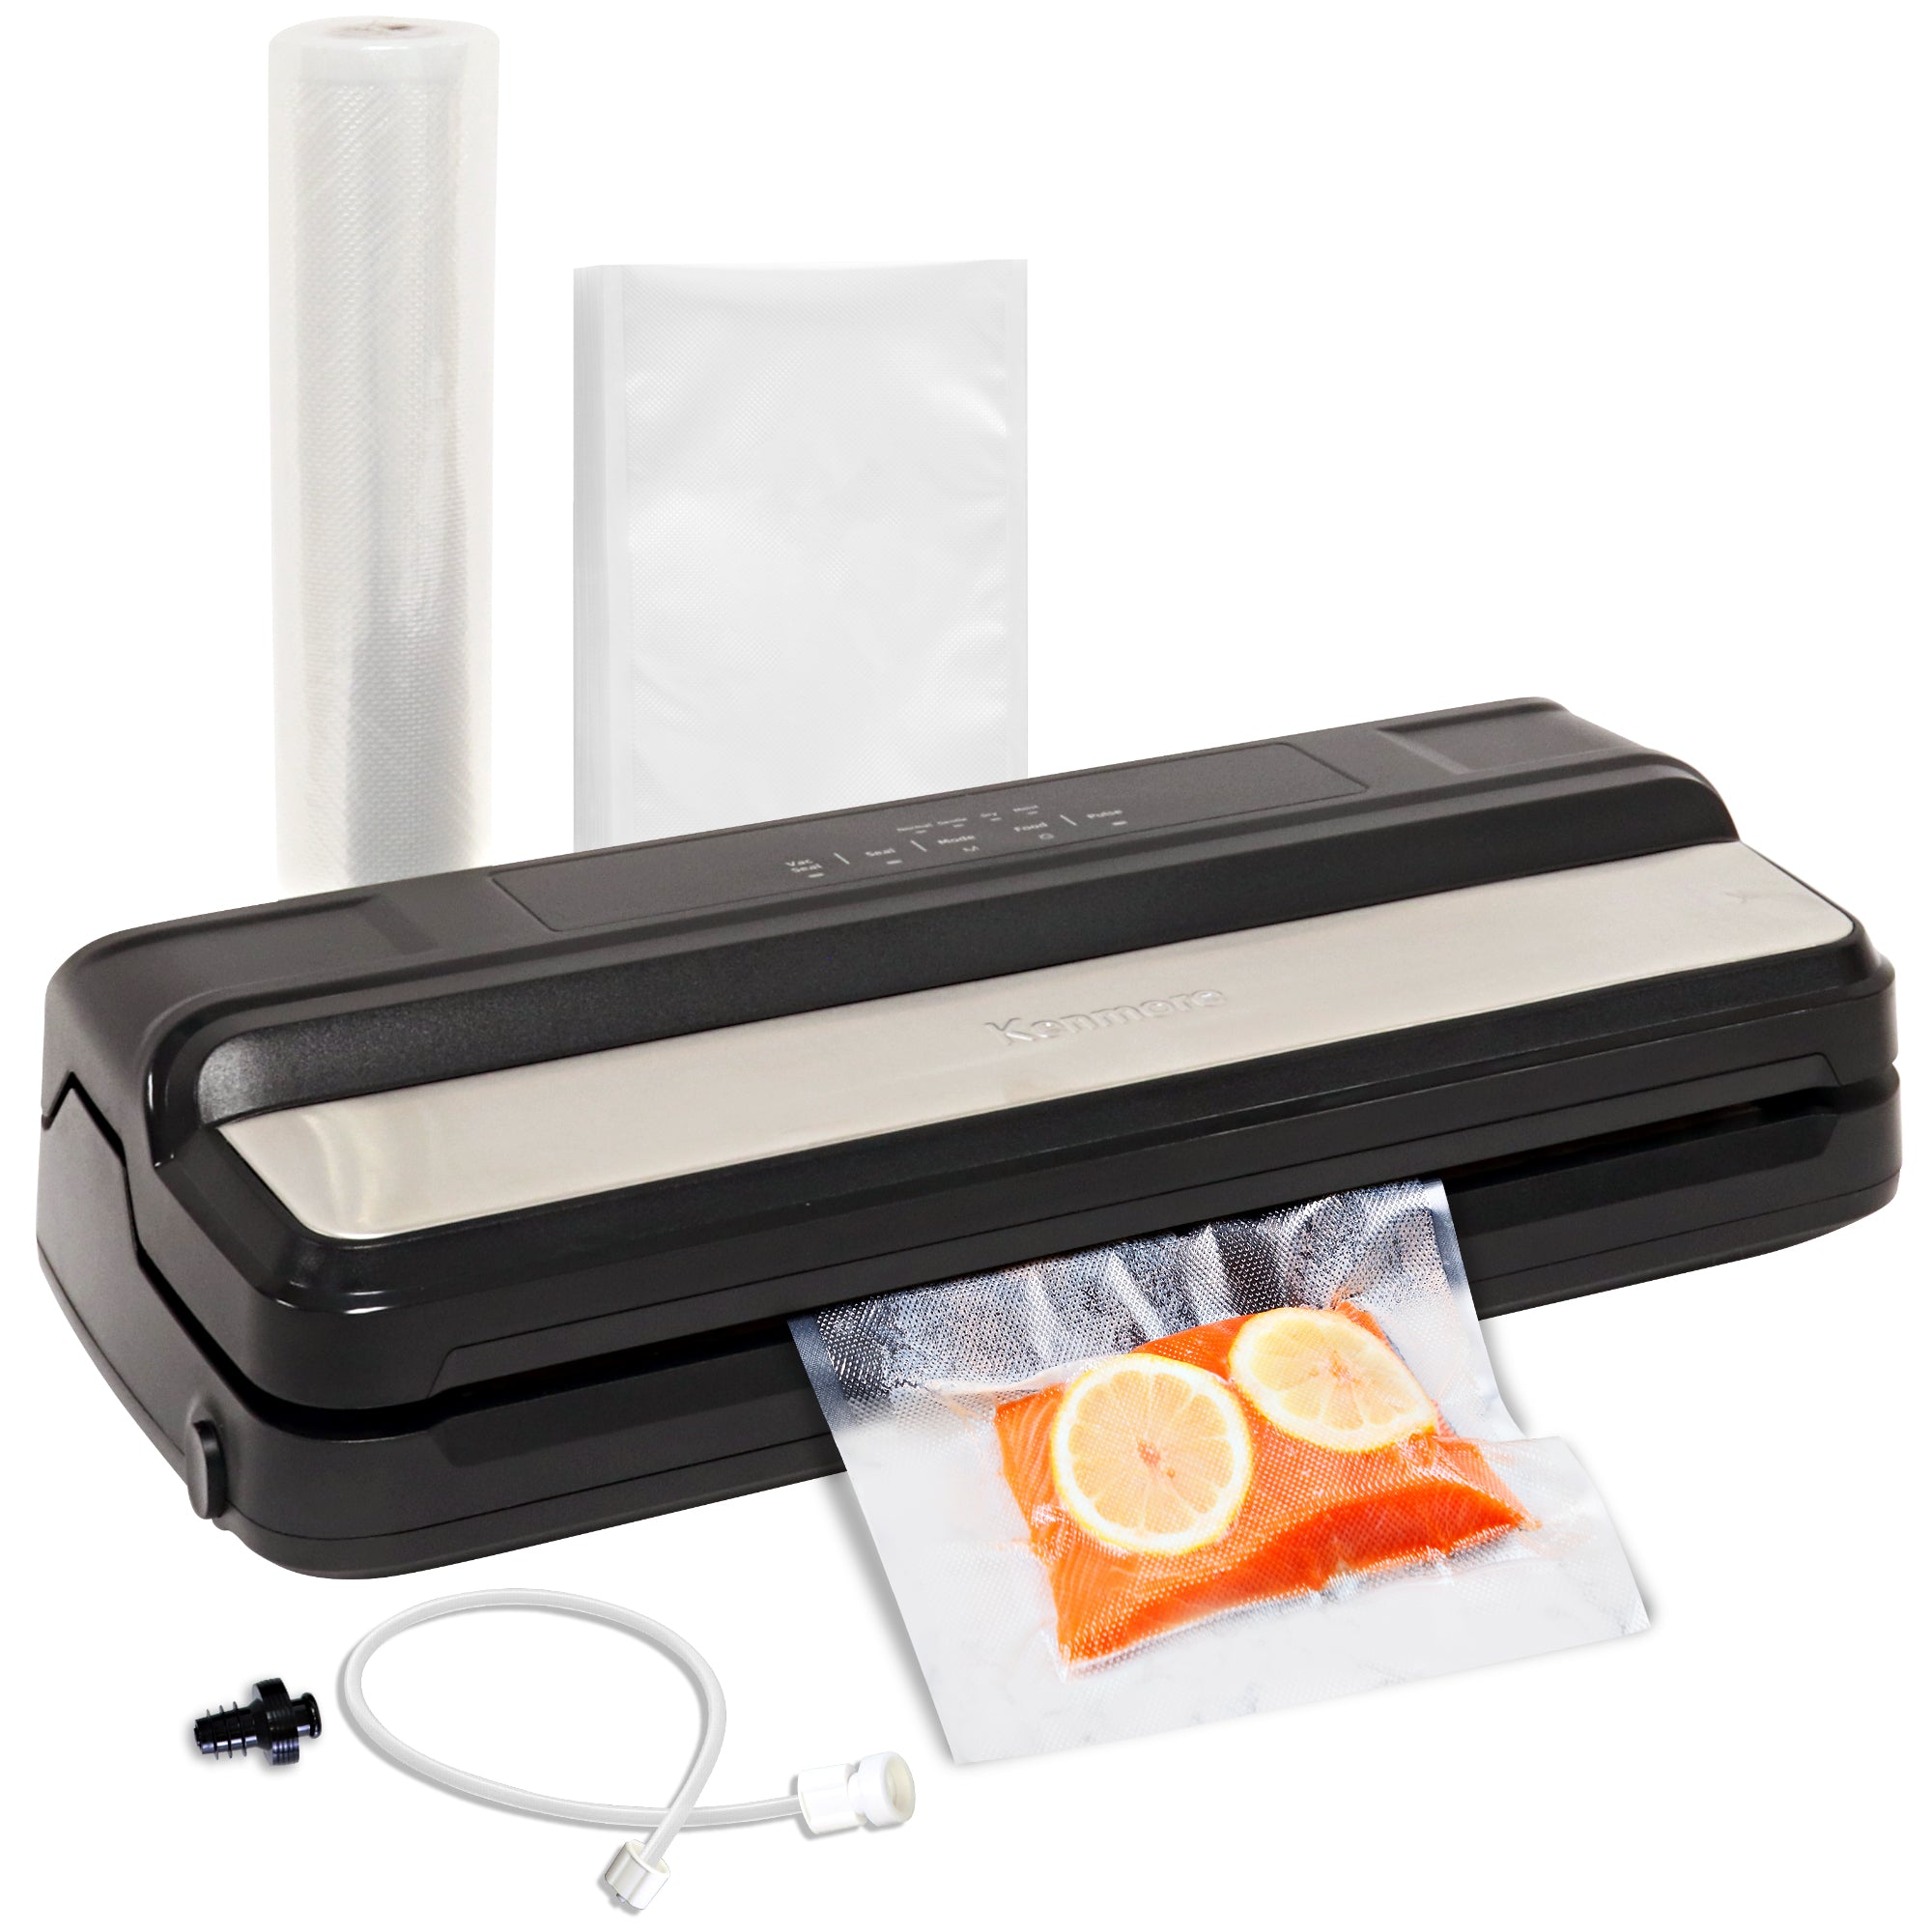 Kenmore vacuum sealer with a bag containing salmon and lemon slices with included accessories (bag roll, individual bags, accessory hose, and bottle stopper) arranged around it on a white background